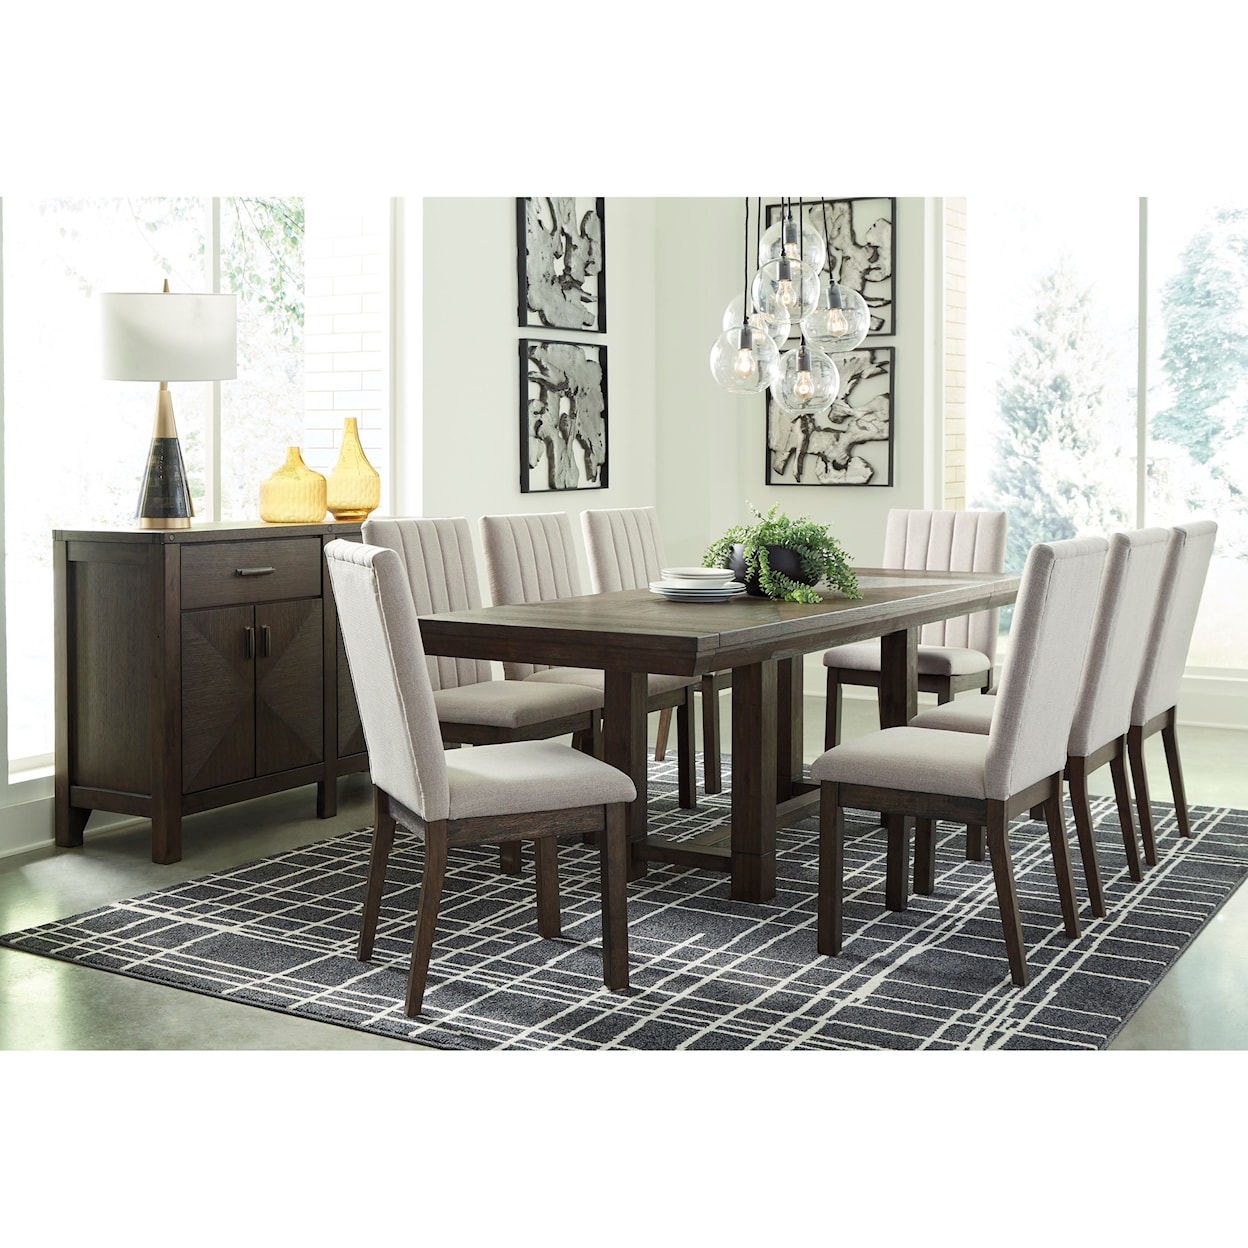 Sig Millennium by Ashley Furniture Dellbeck Dining Room Group